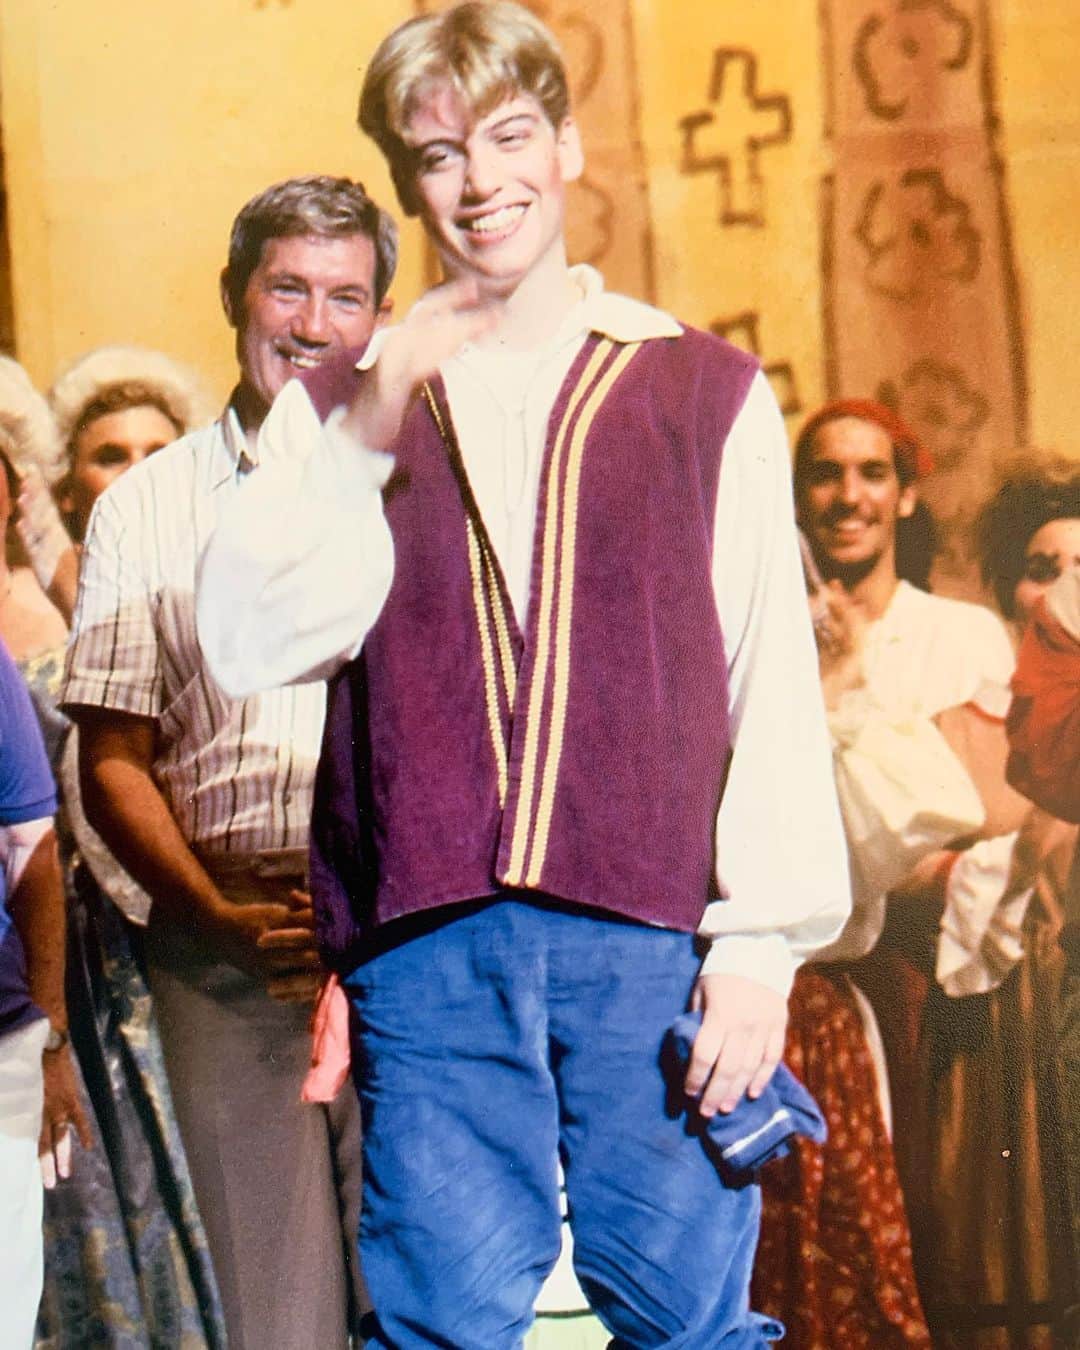 バーレット・フォアのインスタグラム：「I recently unearthed this pic of 17-year-old Barrett at the final performance of Interlochen Arts Camp’s High School Operetta production of Gilbert & Sullivan’s THE GONDOLIERS. I was never a lead in the Operettas, so this captured my disbelief and “awe-shucks-ness” at being awarded Most Outstanding Male Chorus Member OF THE LAST 25 YEARS. A slightly ridiculous if somewhat significant honor since the casts were huge. (I was chosen out of 1,000 guys.) (Looking back, I think they were just blinded by all that blush and my 90s center part. 💁🏼‍♂️ #goldenarches)  I always liked performing in middle school, but the four glorious high school summers I spent at Interlochen Arts Camp plunged me headfirst into the dynamic, transformative, unifying power of The Arts.  It was there I grew from a 14-year-old boy who liked to play pretend to a 17-year-old artist utterly devoted to his craft.  For eight weeks and four summers, I stood side by side with student artists from all over the globe at the very top of their craft - from classical cellists to jazz percussionists, modern dancers to pottery makers, creative writers to Shakespearean actors - I was constantly in awe and constantly inspired.  It was pure magic.  Interlochen Public Radio recently interviewed me about my time at Interlochen, on Broadway, and on 11+ seasons on NCIS: Los Angeles. The link to the article and radio interview are available in my bio.   The arts can, will, and must keep thriving.  As a way to give back to an institution that gave me so much (including this preposterous award!), I established the Barrett Foa Endowed Scholarship in Theatre Arts.  I return to Interlochen every few years to meet my scholarship students, teach master classes, and relive the magical memories hidden around every corner.   “Dedicated to the Promotion of World Friendship Though the Universal Language of the Arts”  #interlochenartscamp #interlochen #interlochencenterforthearts #summer #summercamp #arts #TheArts #theatre #theater #theatrekid #musicaltheatre #opertta #gilbertandsullivan #chorus #onetimeatbandcamp #thisonetimeatbandcamp」